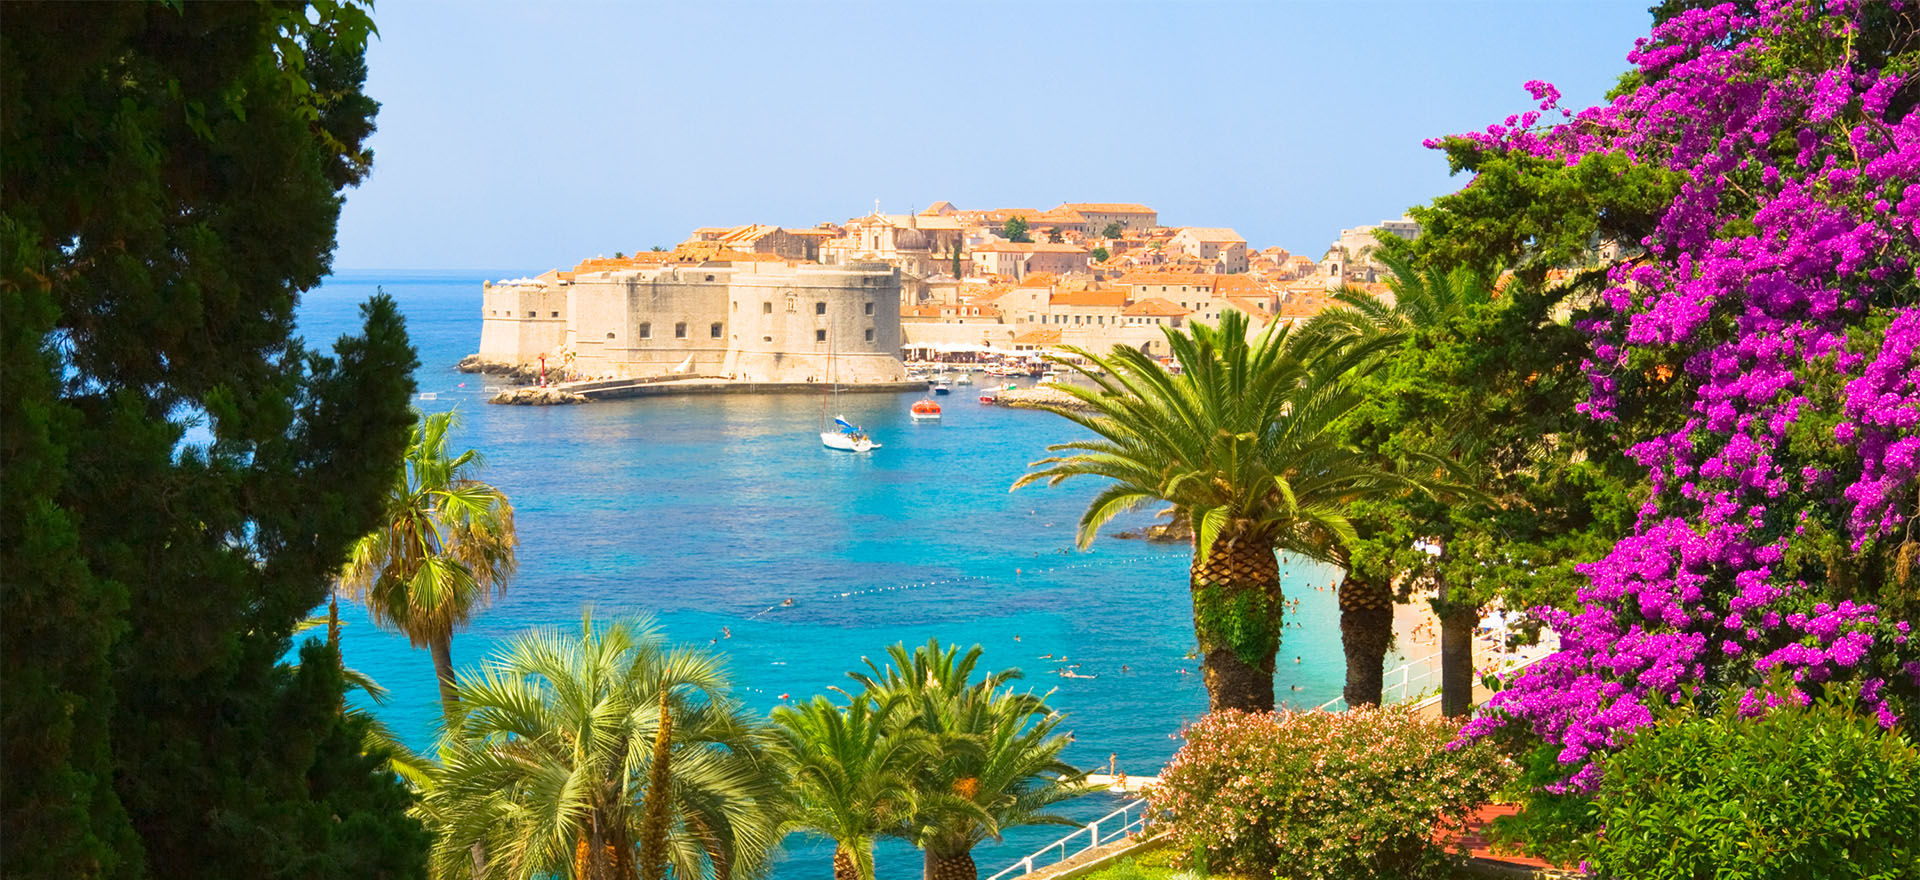 Palm trees with the walls of Dubrovnik's old town on the coast in the distance | Dubrovnik, Croatia